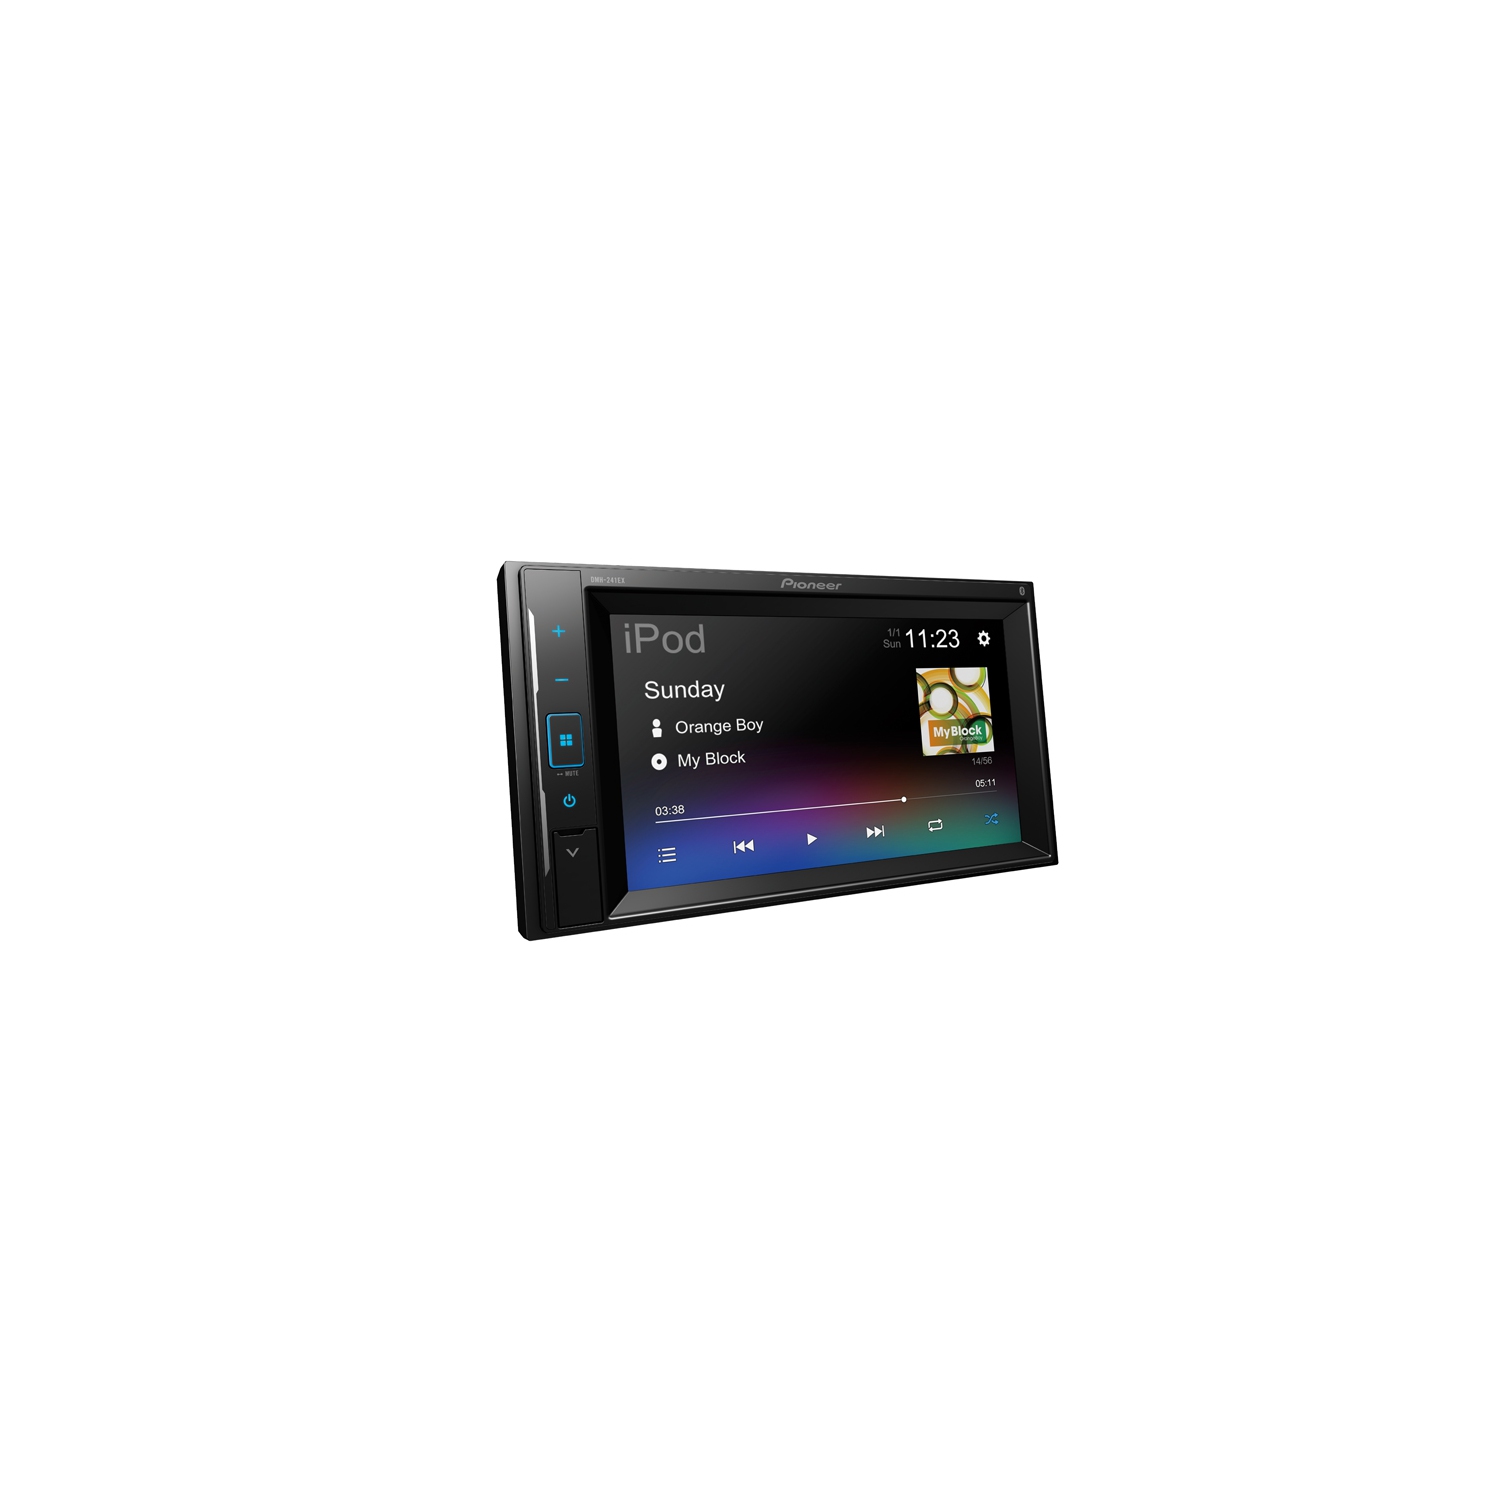 DMH-241EX 6.2"- Resistive Touchscreen, Amazon Alexa Built-in when Paired with Pioneer Vozsis App, Bluetooth,Back Up Camera Ready Digital Media Receiver